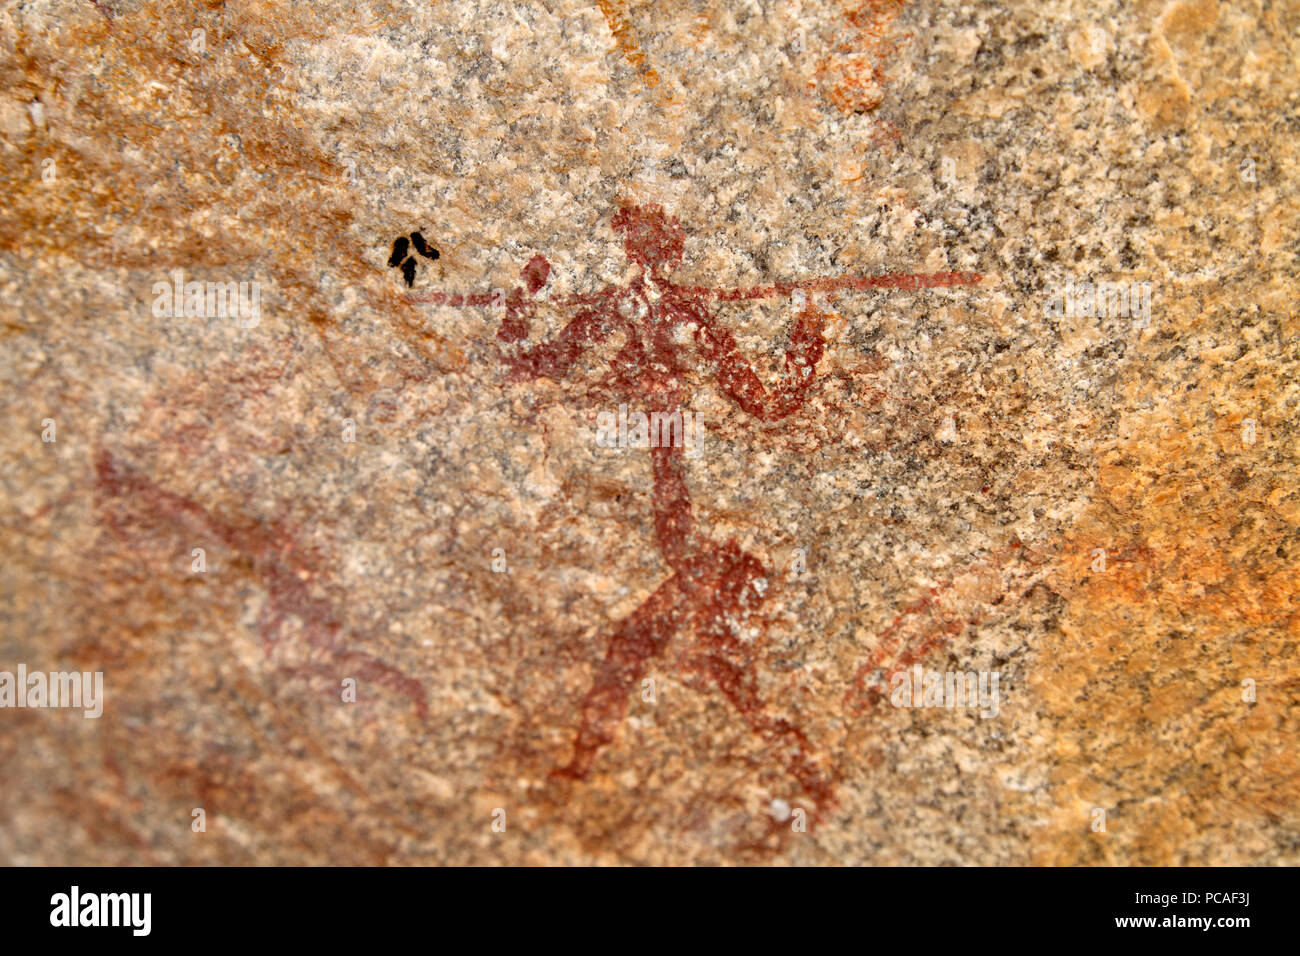 Ancient rock art of painting depicting a human carrying a spear, at Matobo National Park, Zimbabwe, Africa Stock Photo